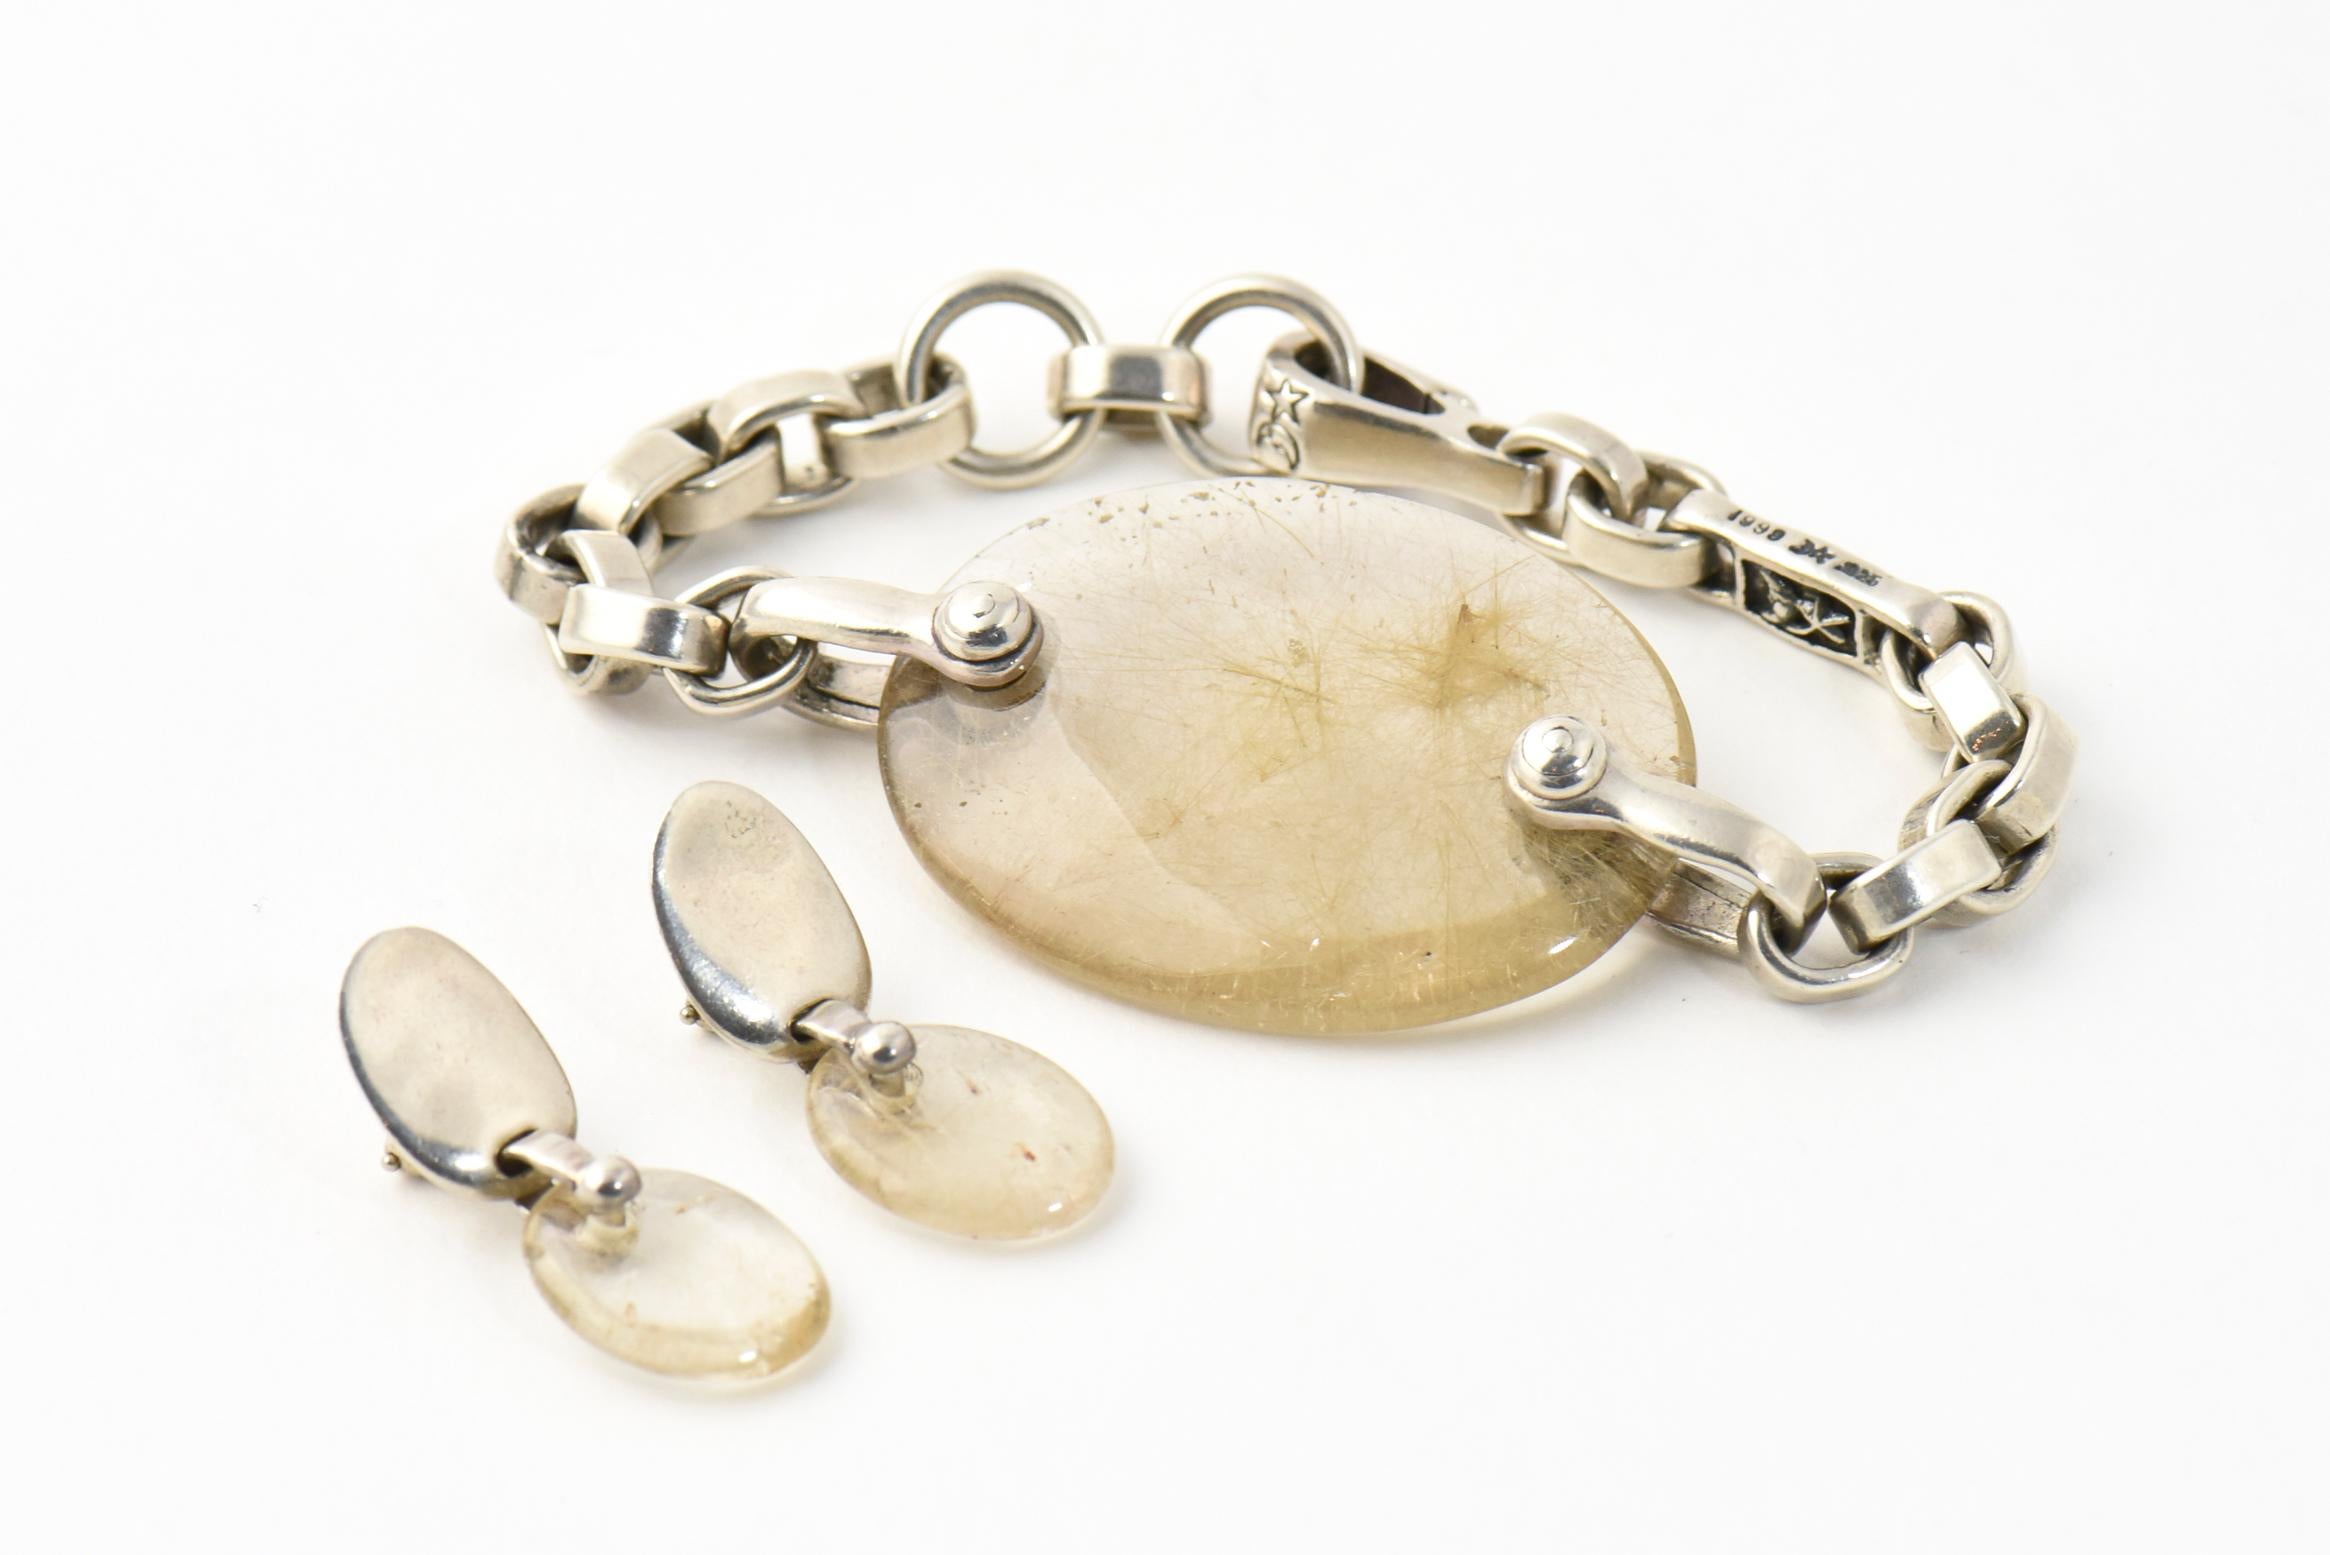 Barry Kieselstein-Cord oval rutilated quartz charm on sterling silver oval link chain bracelet and hinged clip closure. The matching earrings feature an oval sterling silver piece with dangling oval rutilated quartz.  The earrings are clip-on (no